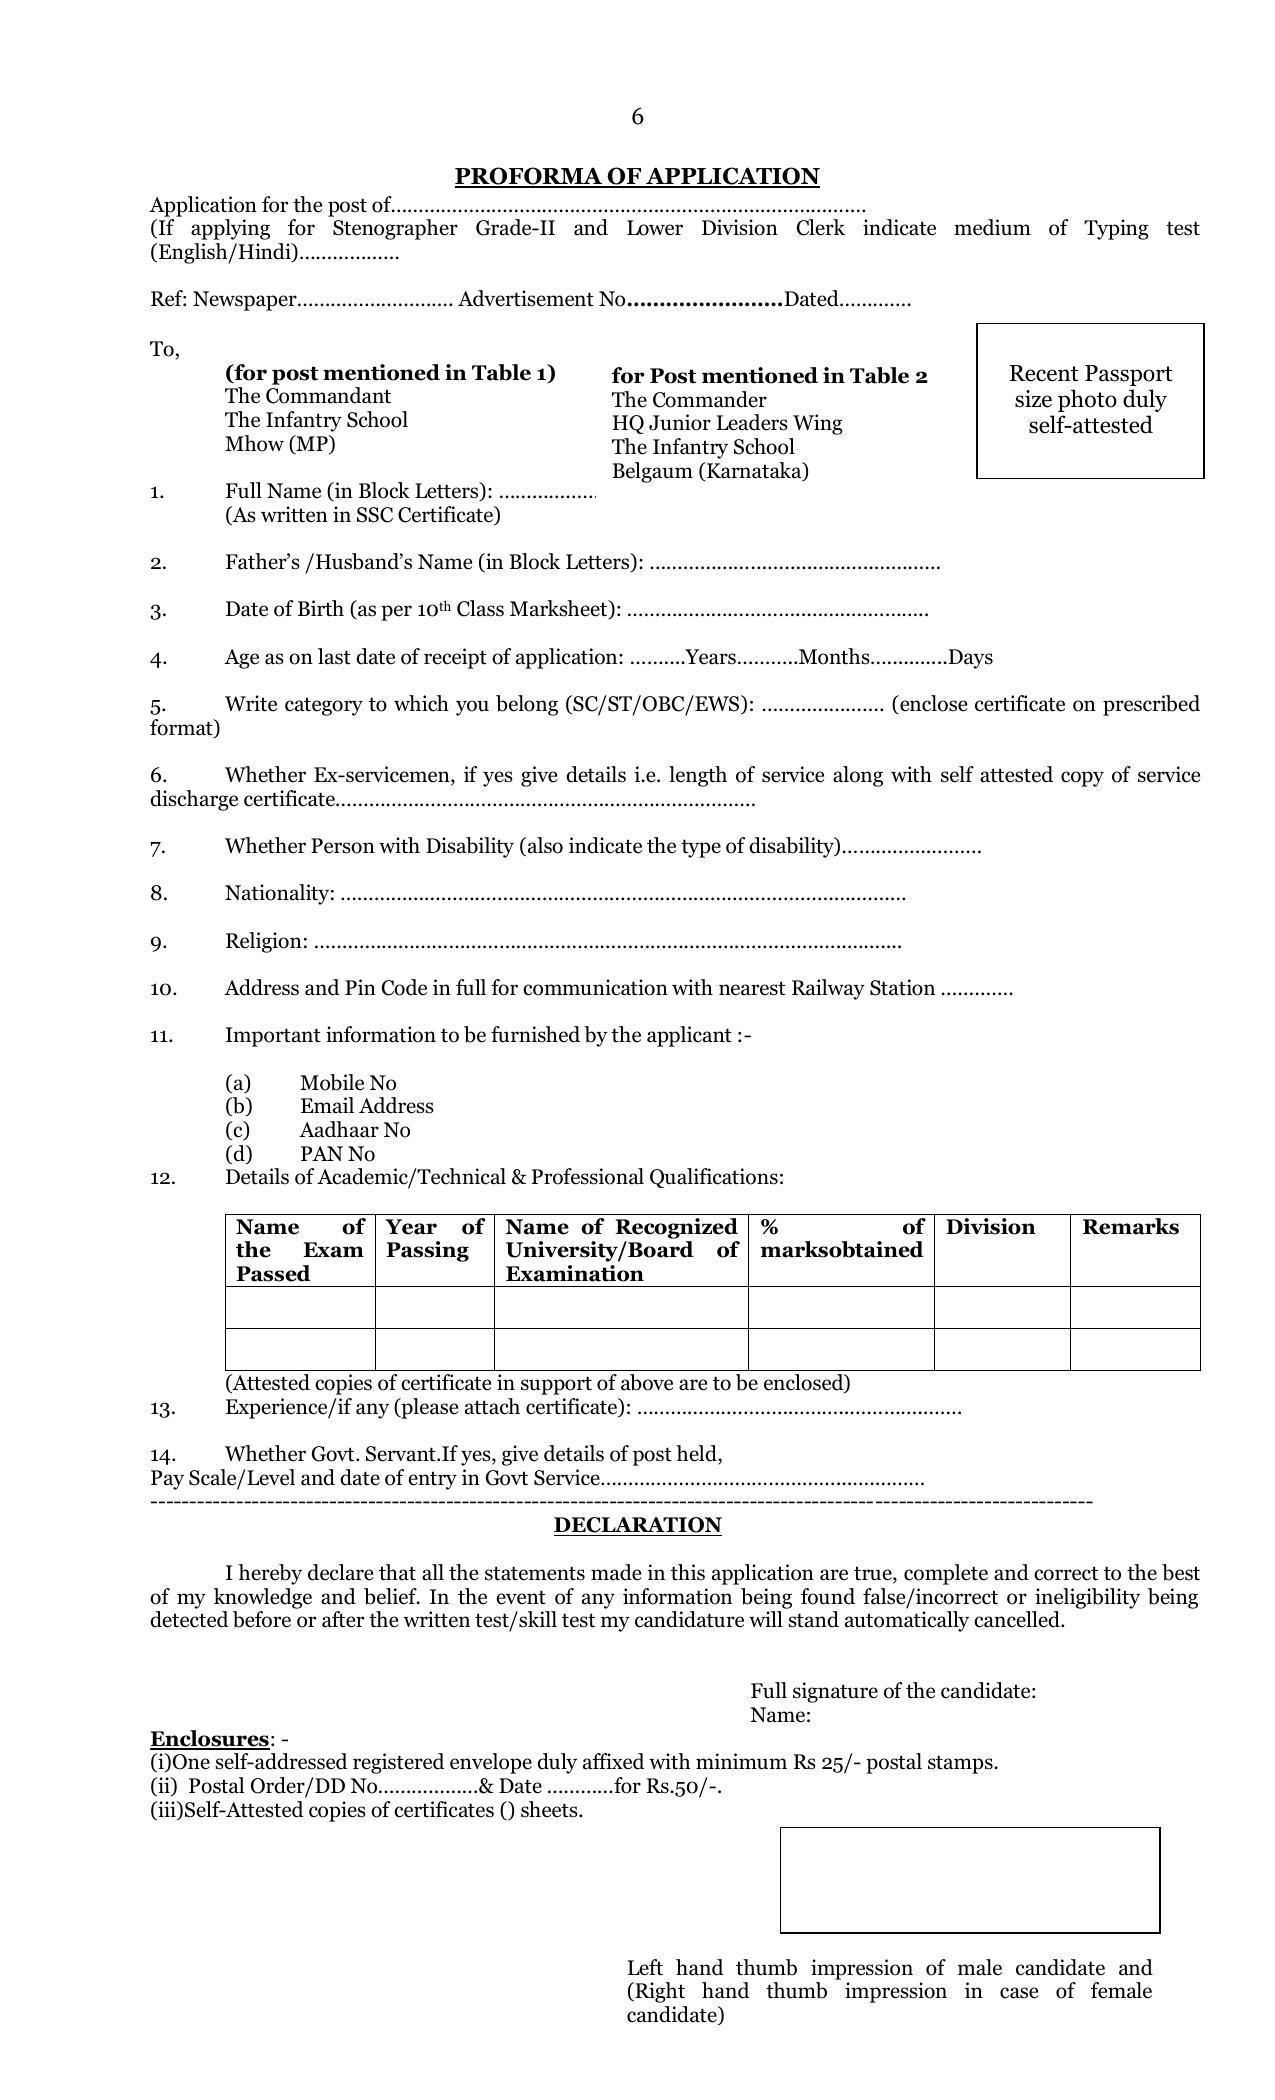 HQ Infantry School MHOW Invites Application for 101 Lower Division Clerk, Stenographer and Various POsts - Page 9